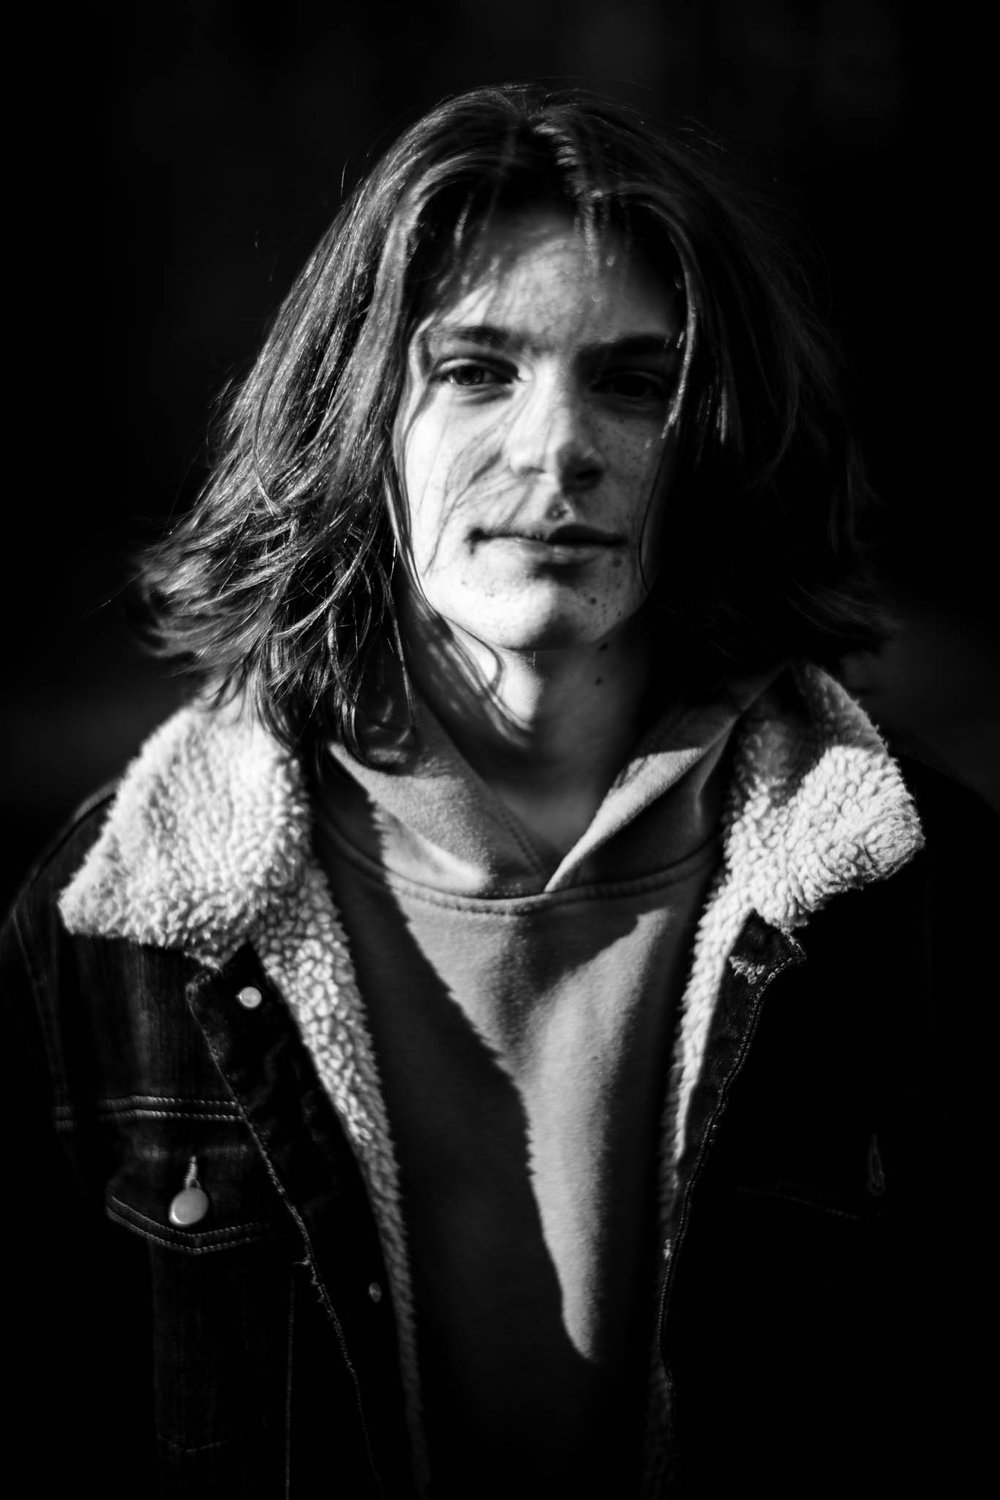 dramatic portrait of boy with long hair staring into the camera